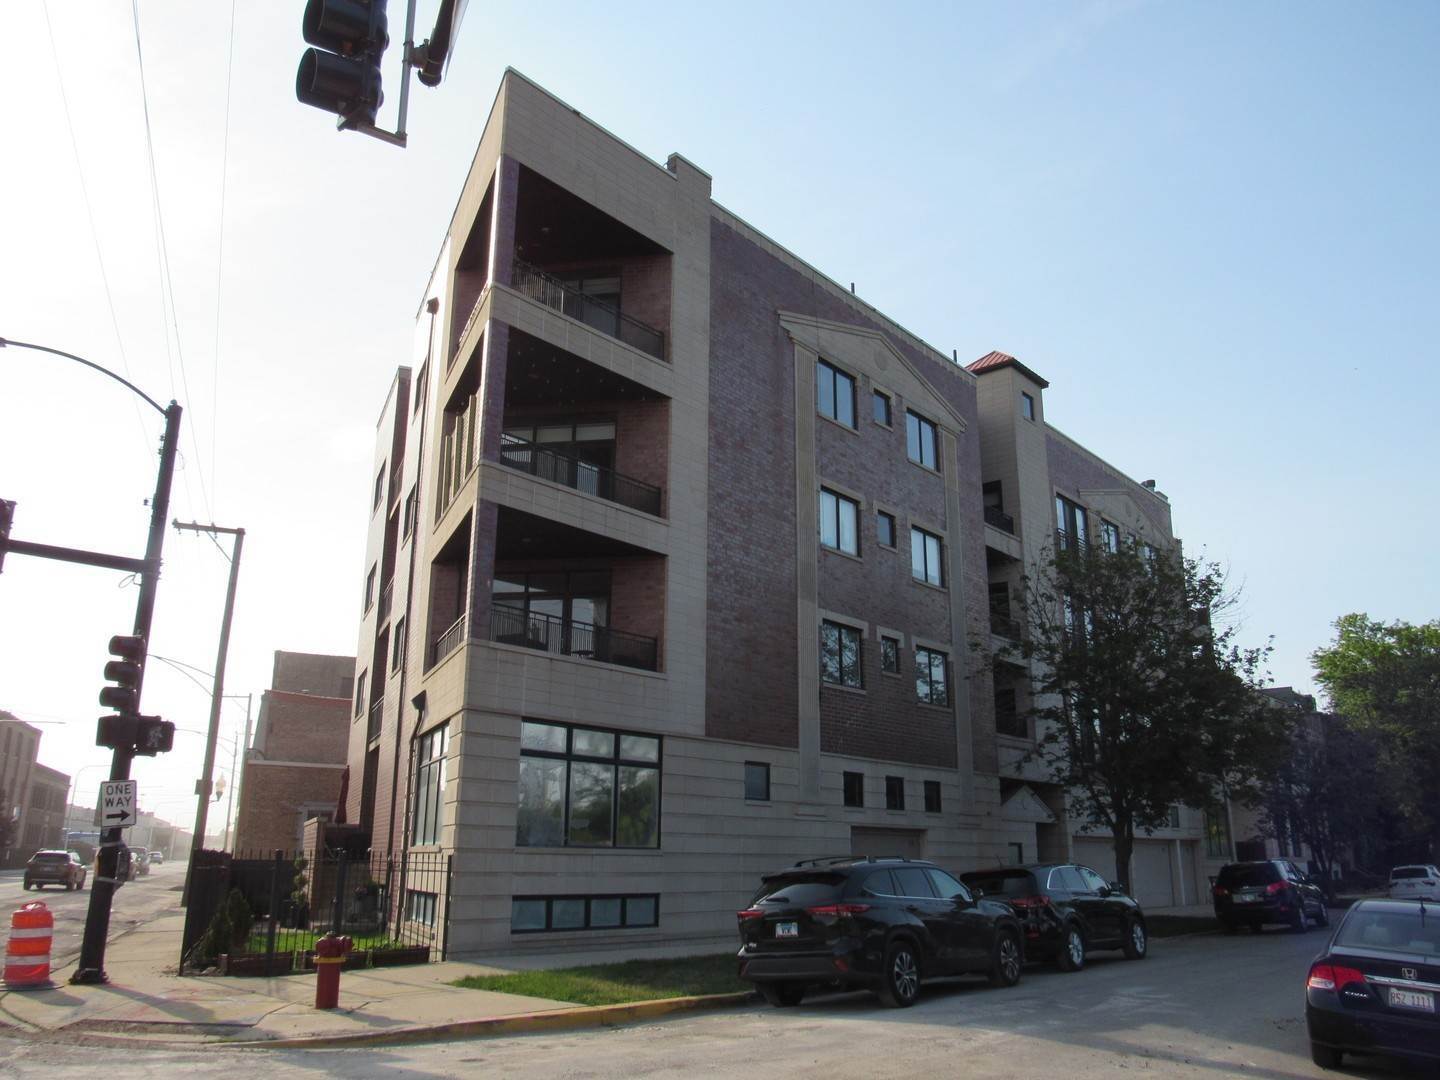 Single Family for Sale at Smith Park, Chicago, IL 60612